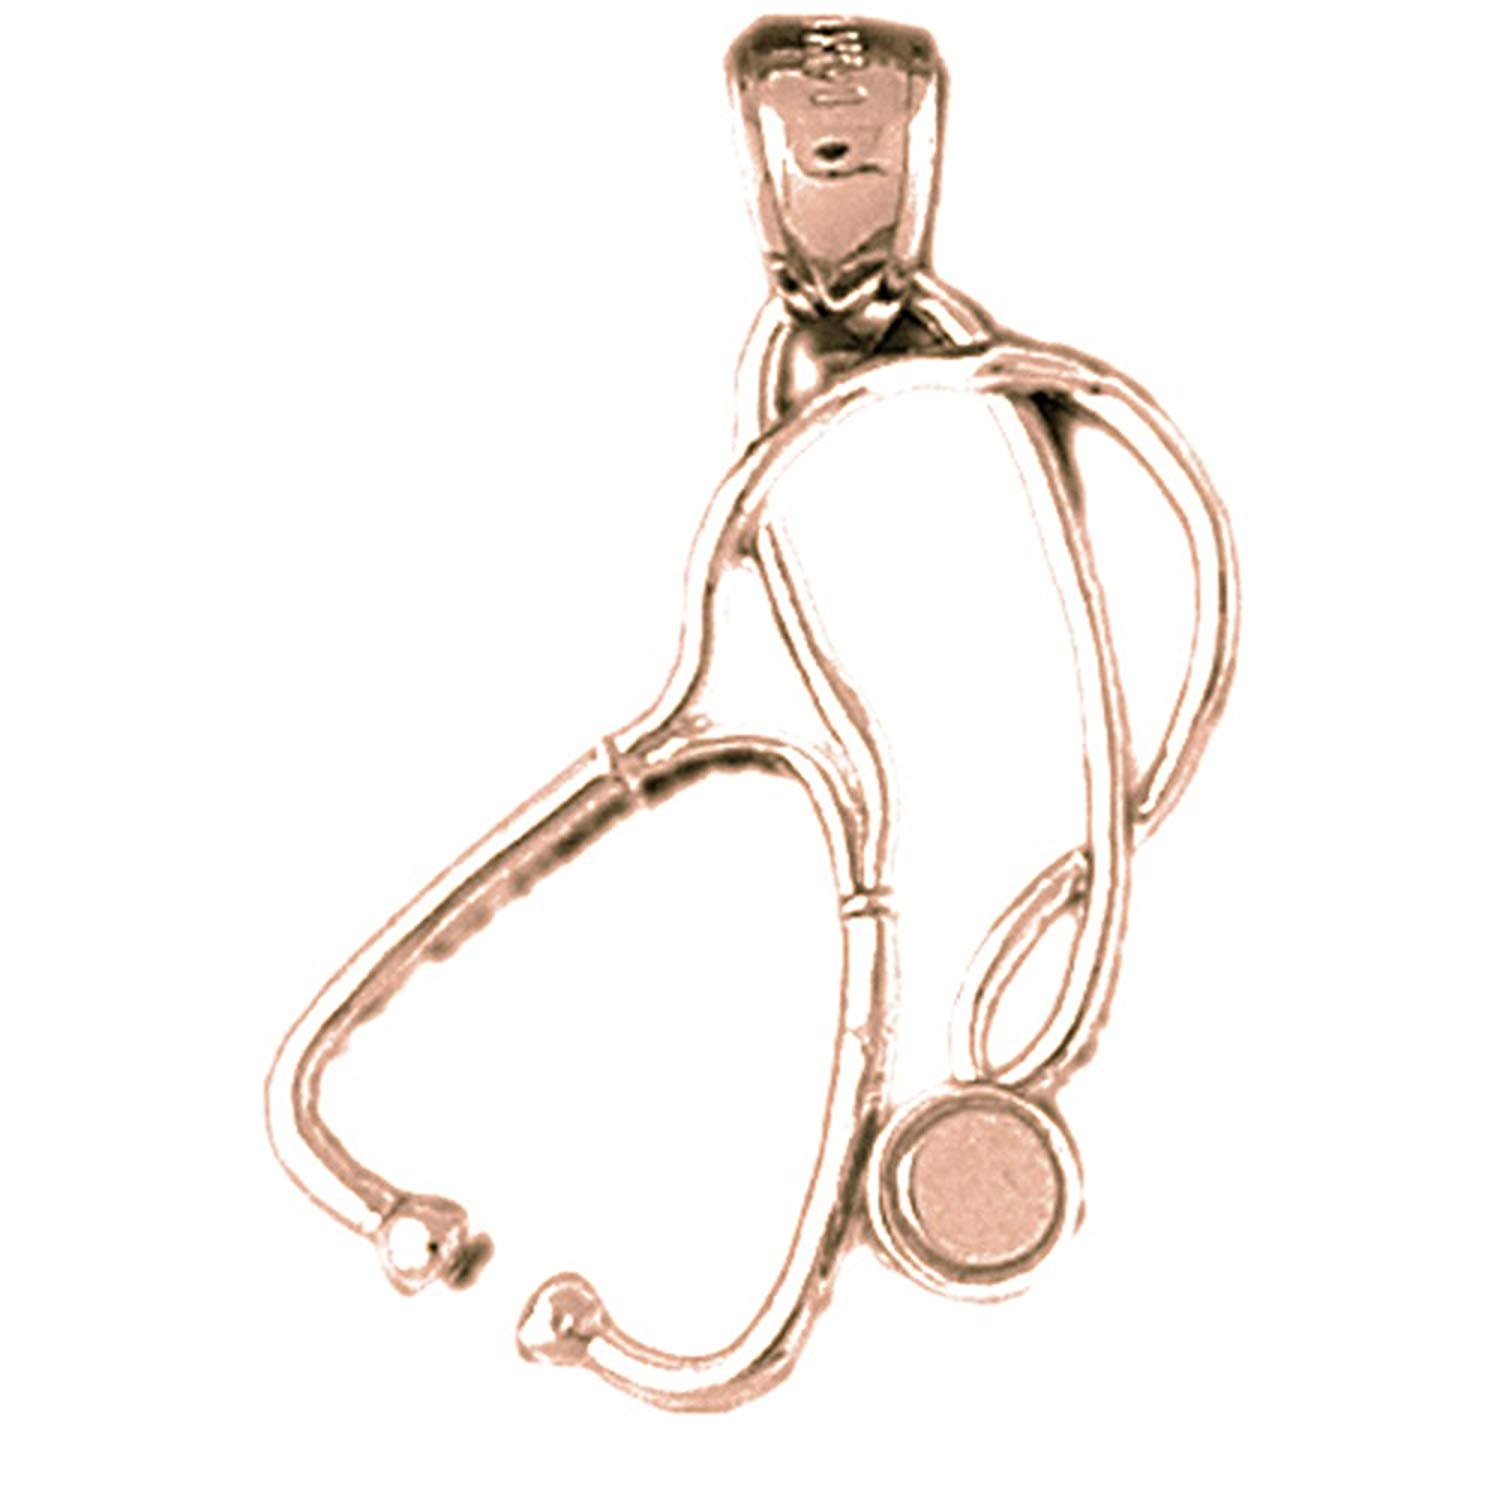 Stethoscope Sketch at PaintingValley.com | Explore collection of ...